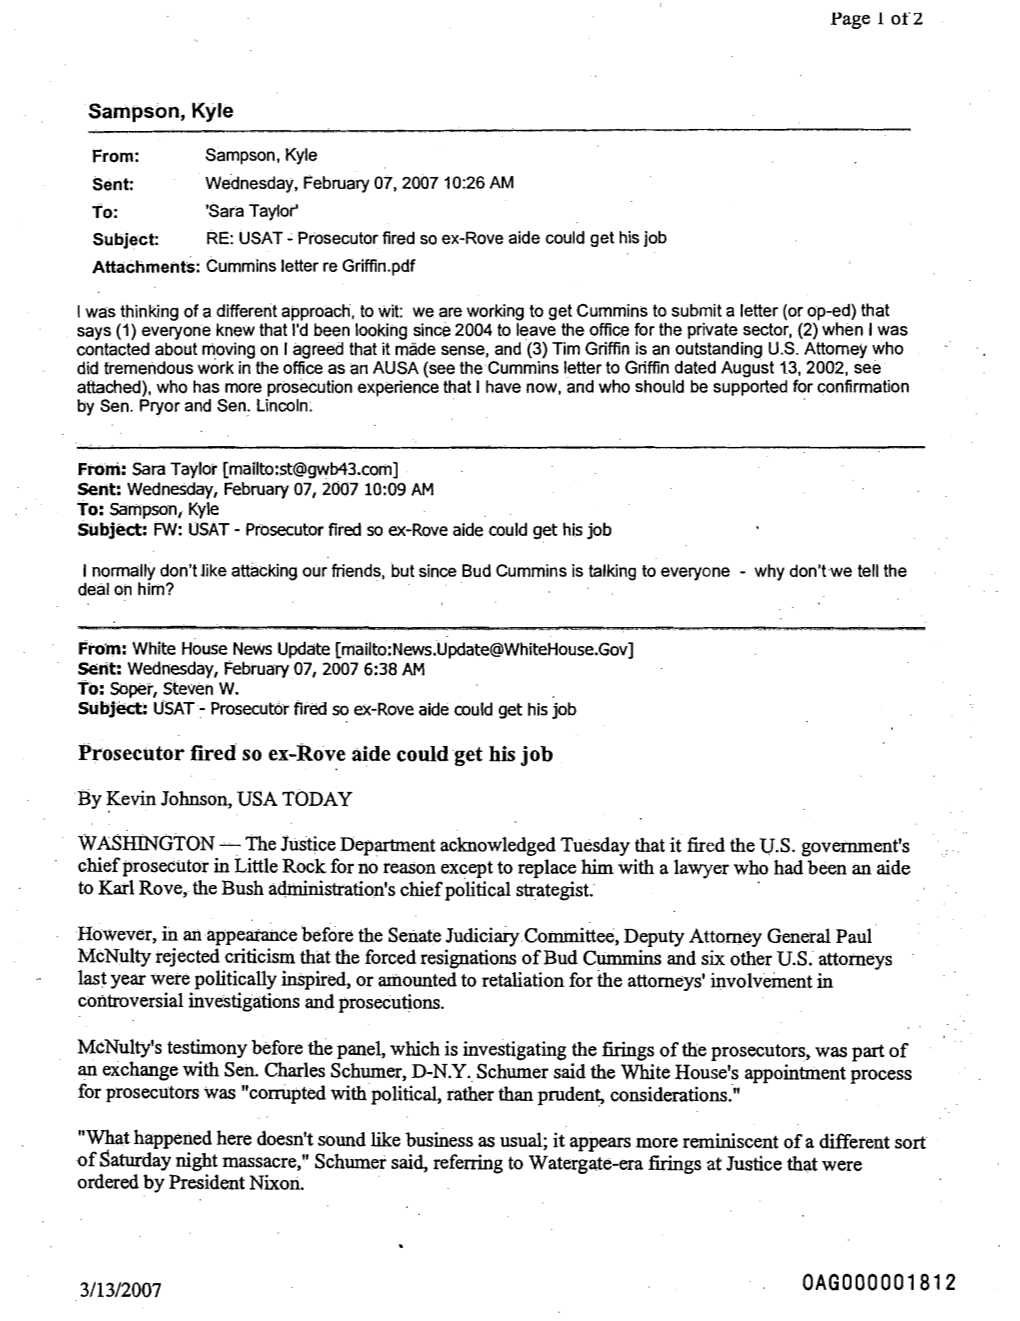 Prosecutor Fired So Ex-Rove Aide Could Get His Job ~Ttaclimenb:Cummins Letter Re Griffin.Pdf